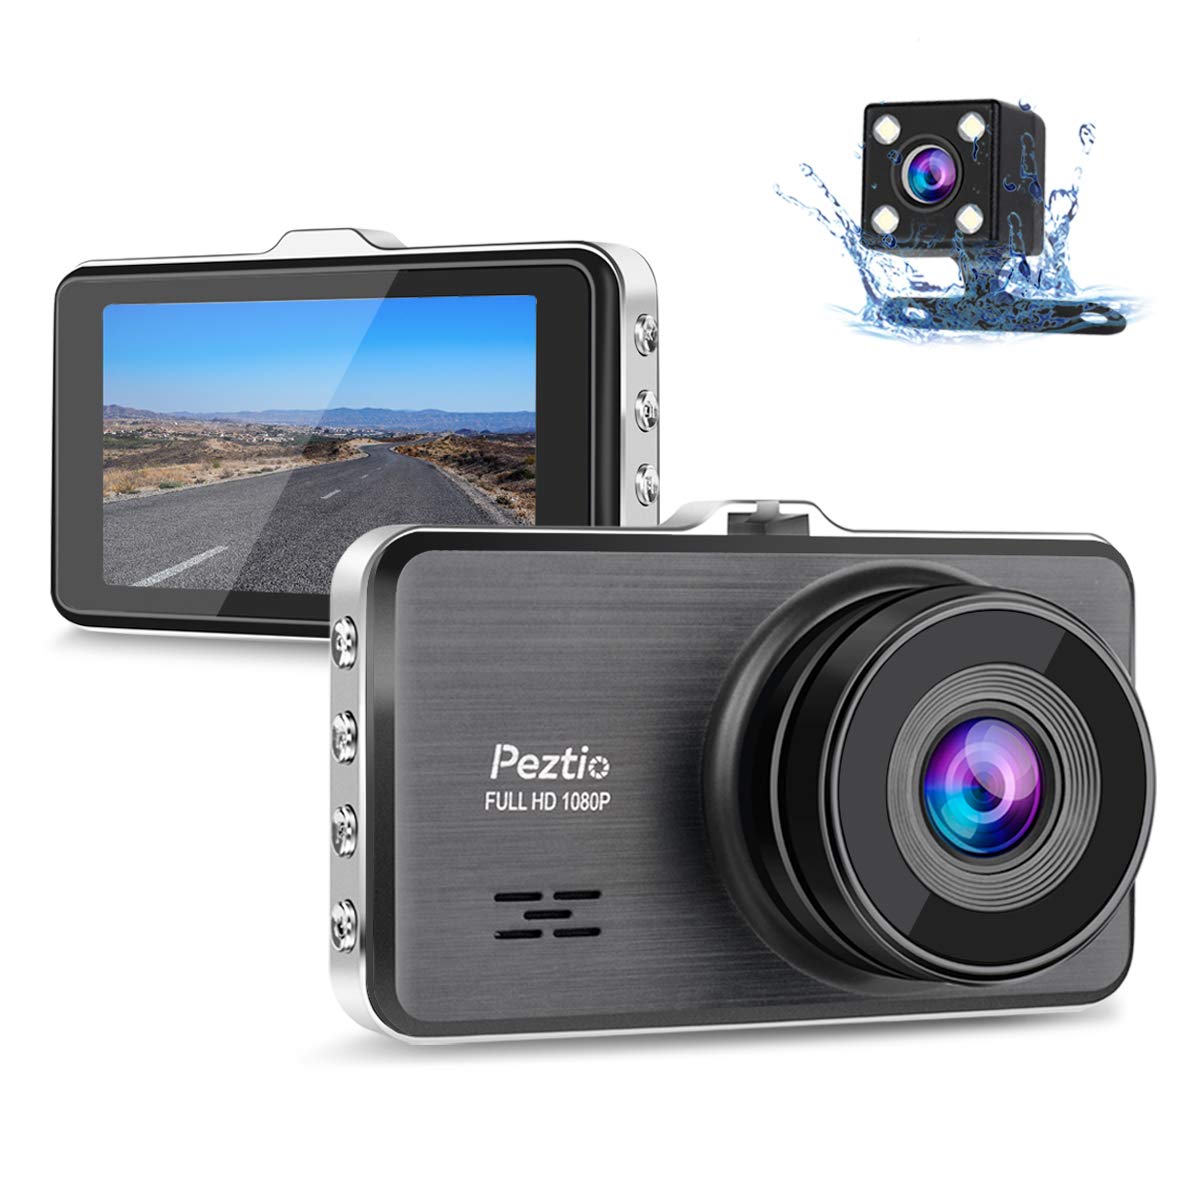 Dual Dash Cam Front and Rear, 1080P Full HD Car DVR Dashboard Camera Recorder with Night Vision, 3 inch IPS Screen, 170 Super Wide Angle, G Sensor, Parking Monitor, Motion Detection, WDR